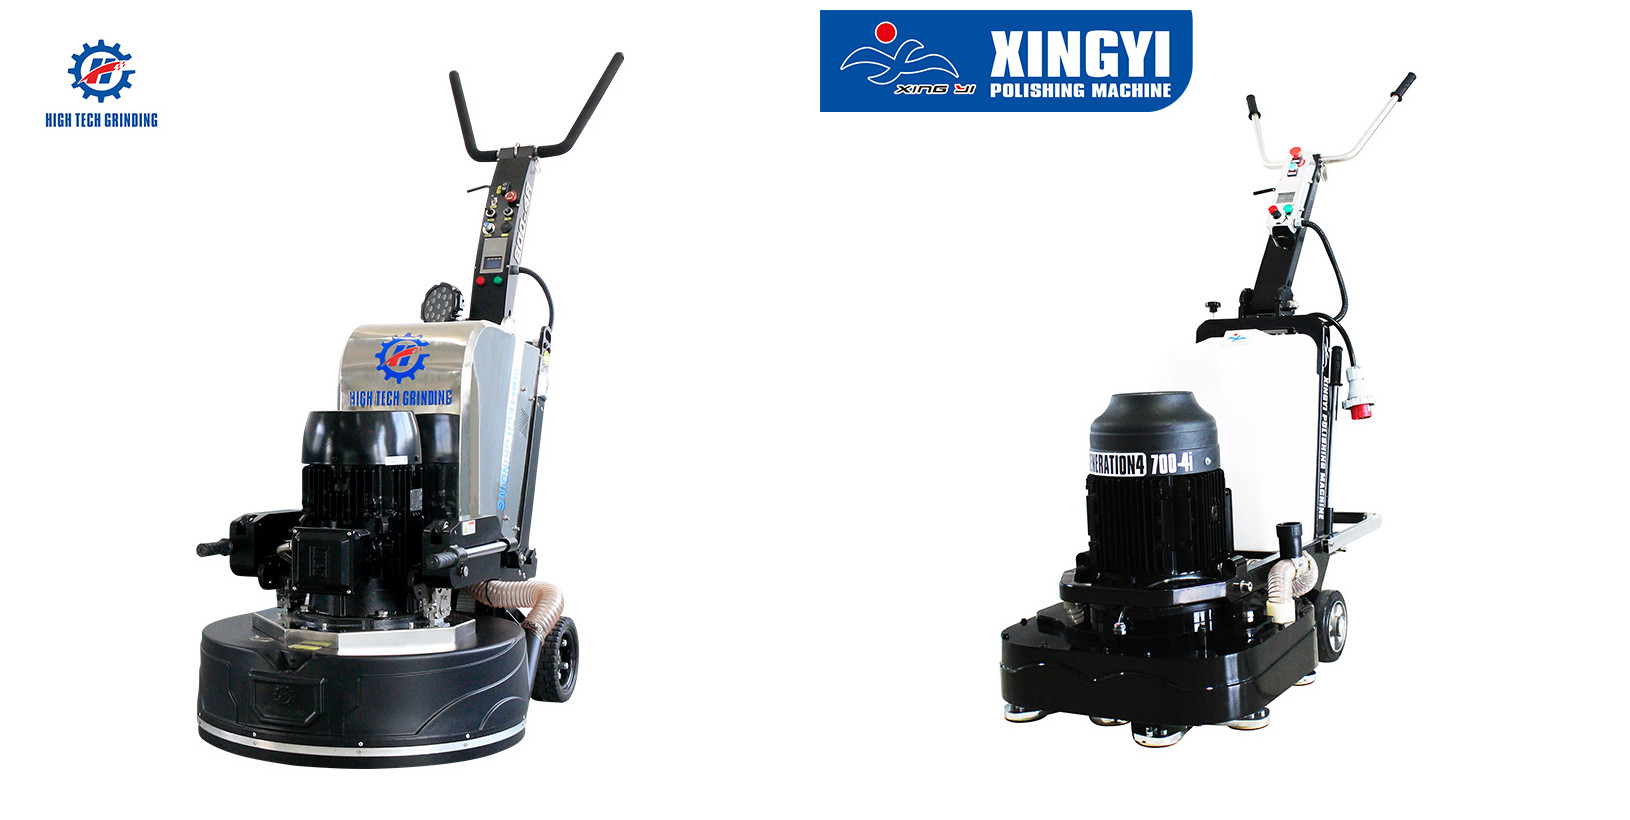 Is it better to choose a round machine or a square machine for the floor grinding machine?